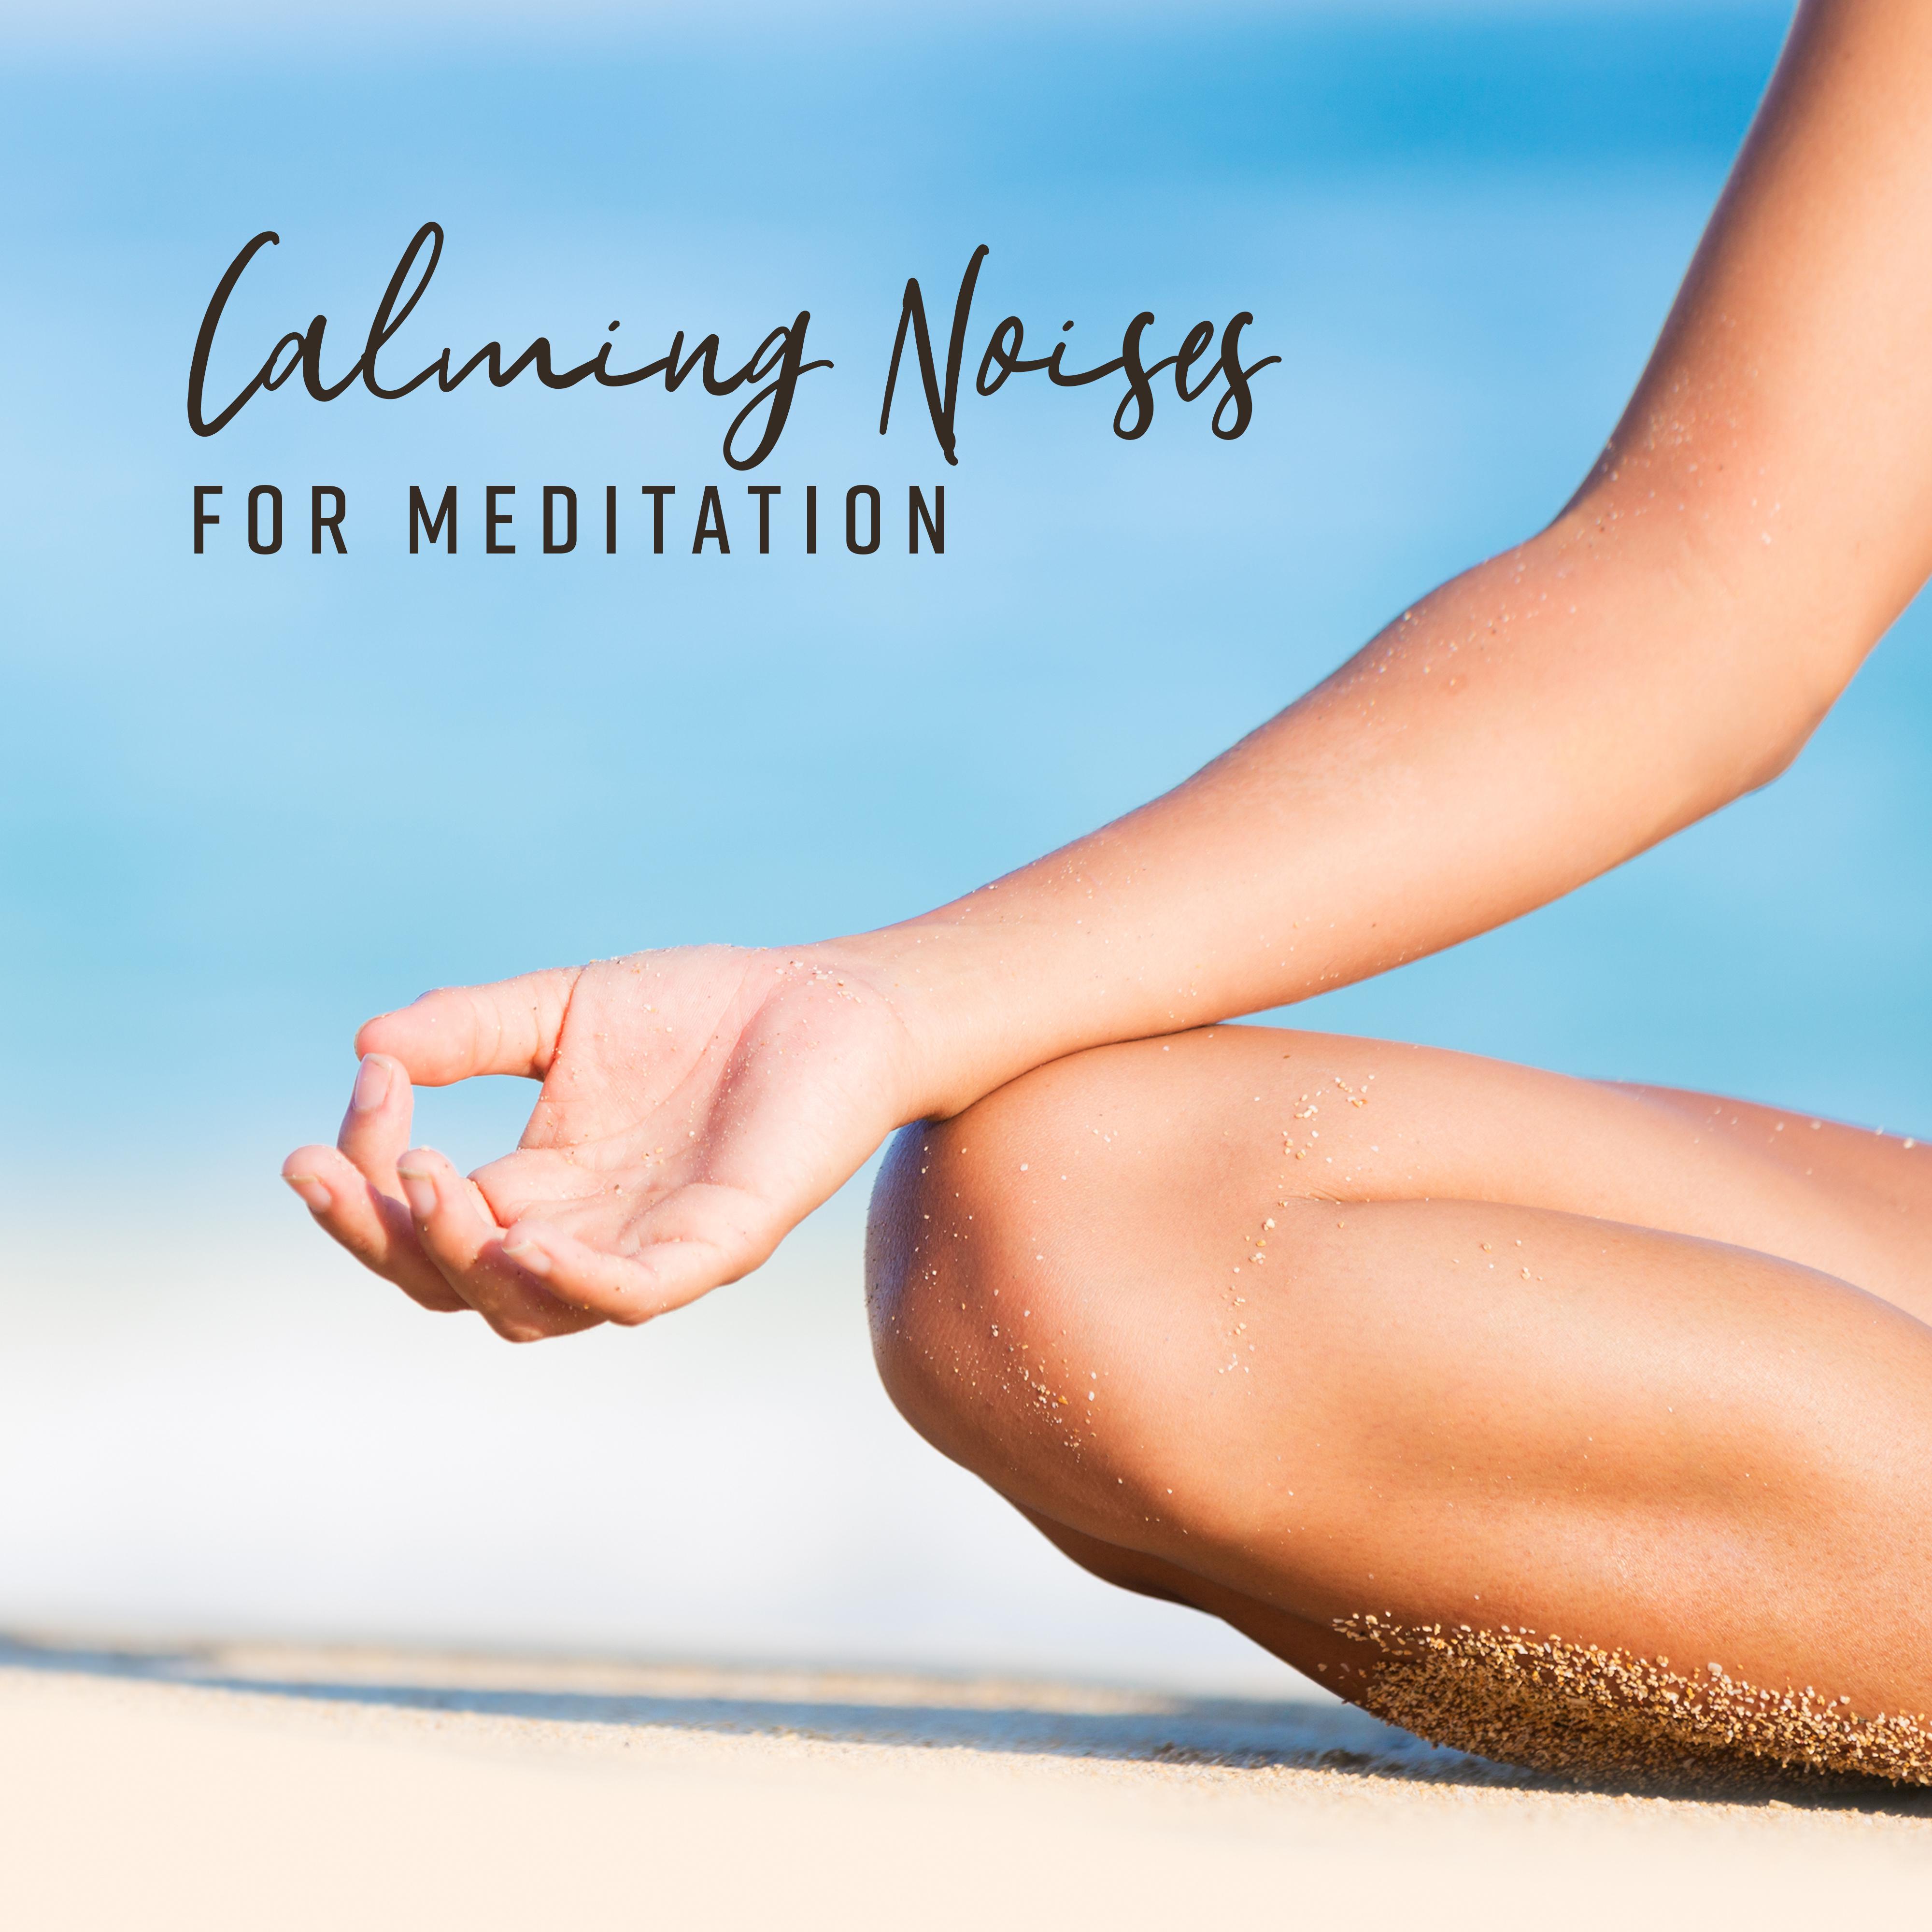 Calming Noises for Meditation – Yoga Practice, Chakra Healing Music, Yoga Meditation, Asian Relaxation Therapy, Mindfulness Training